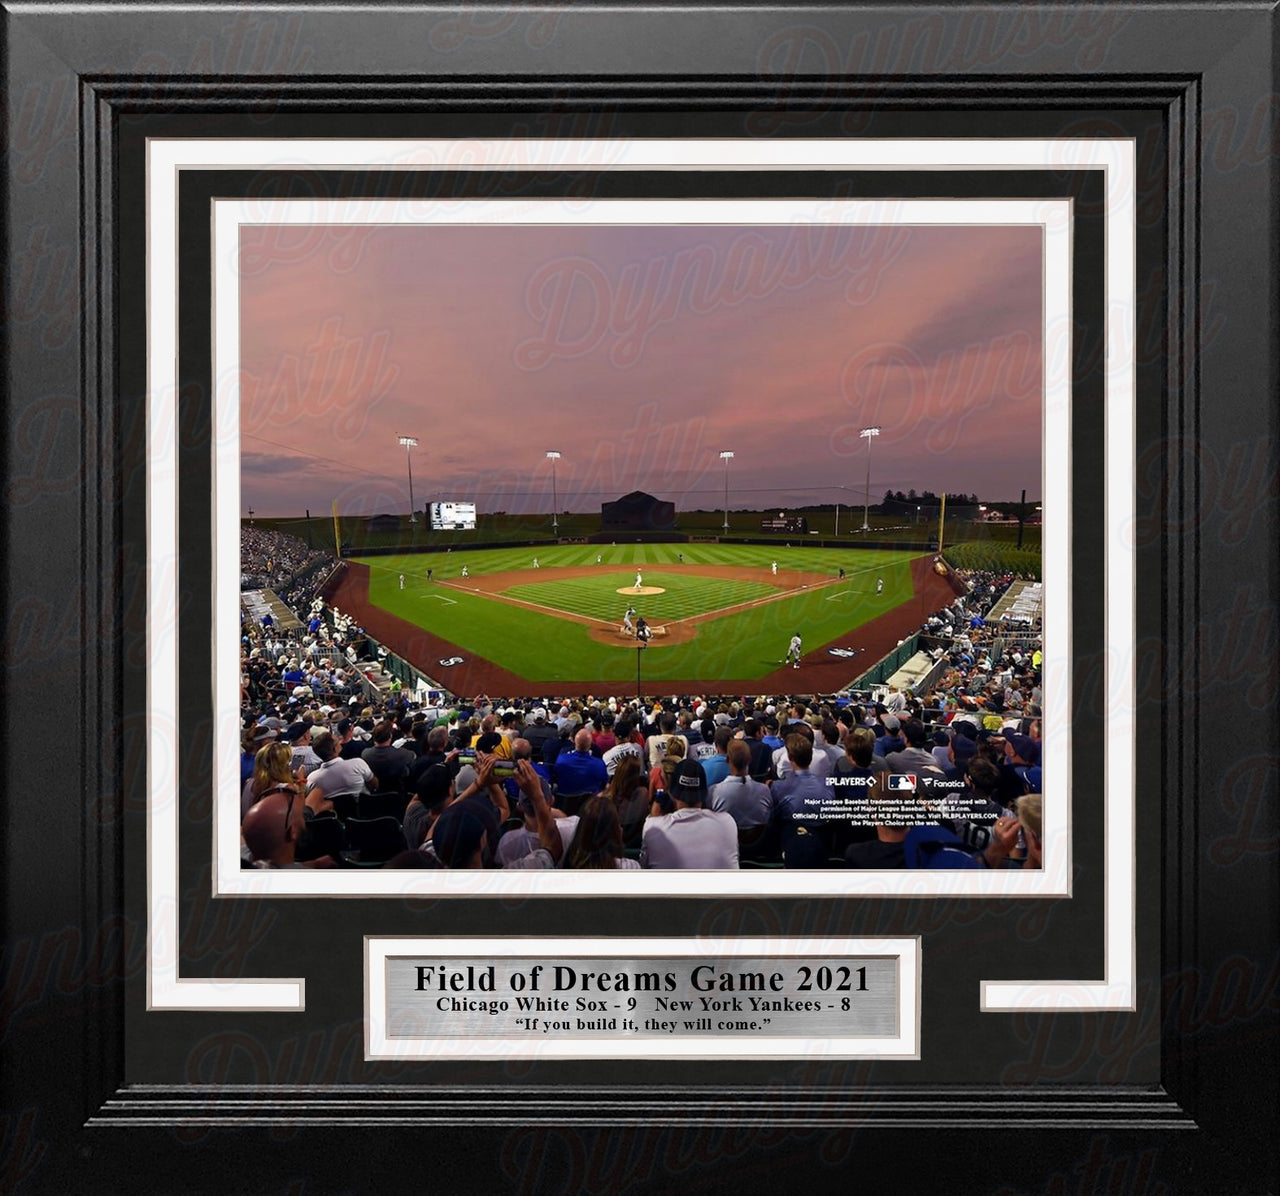 New York Yankees Dream Scene Framed and Matted Lithograph Artwork Print by  Artist Jamie Cooper - Dynasty Sports & Framing